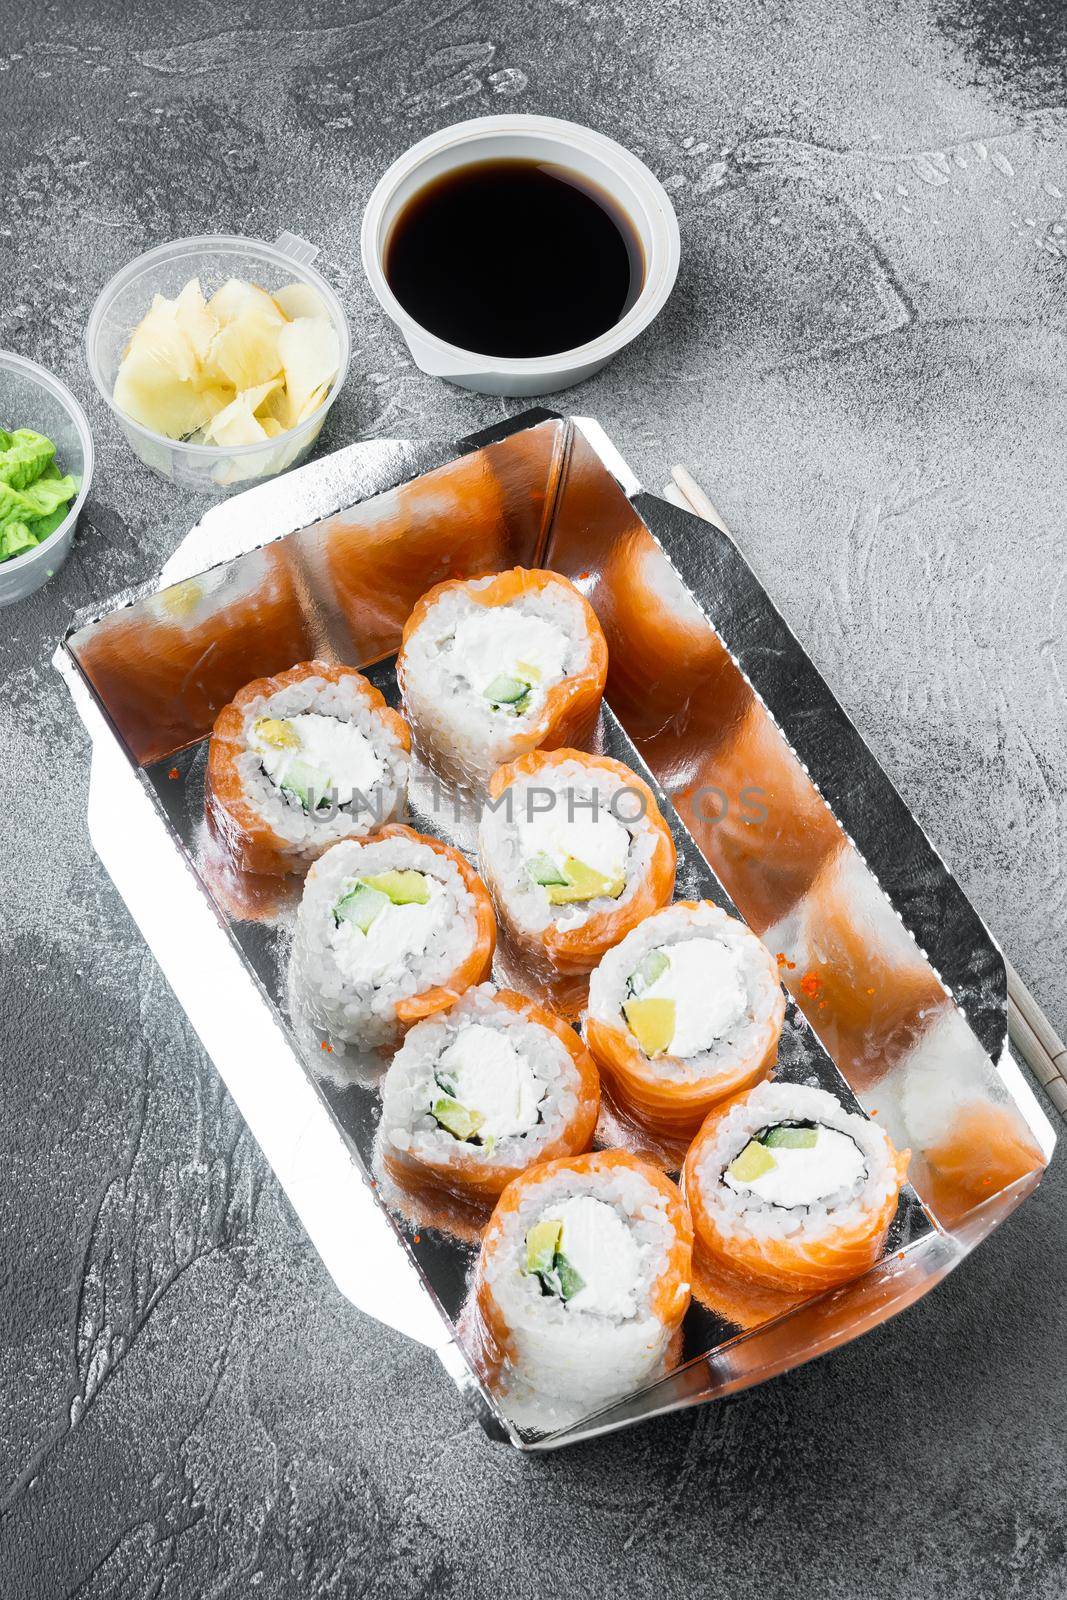 Variety of different sushi and rolls fro, salmon and tuna in delivery food concept set, on gray stone background